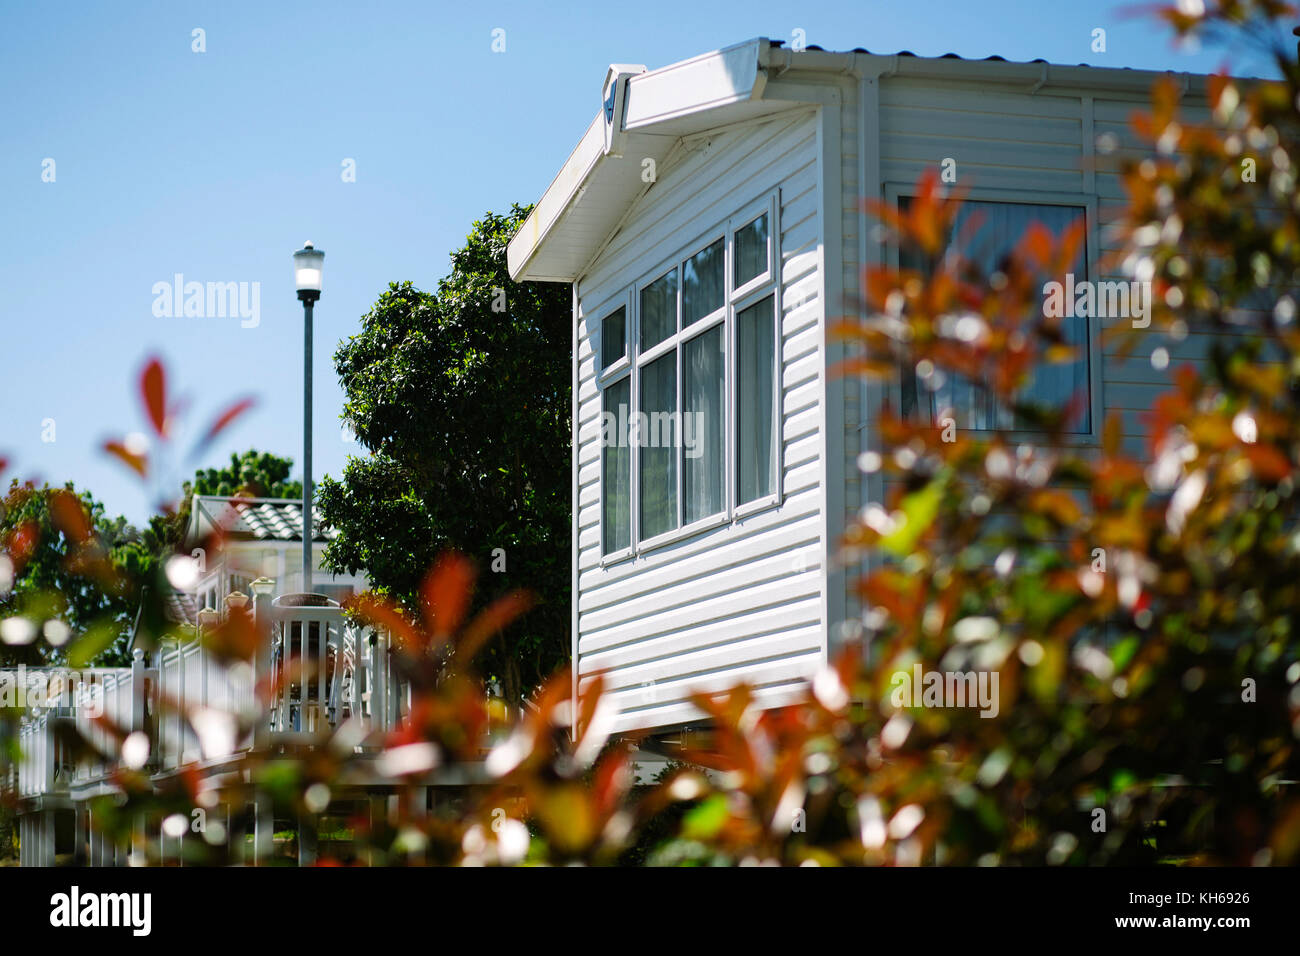 A static caravan / holiday home in Rockley Park, near Poole, Dorset Stock Photo